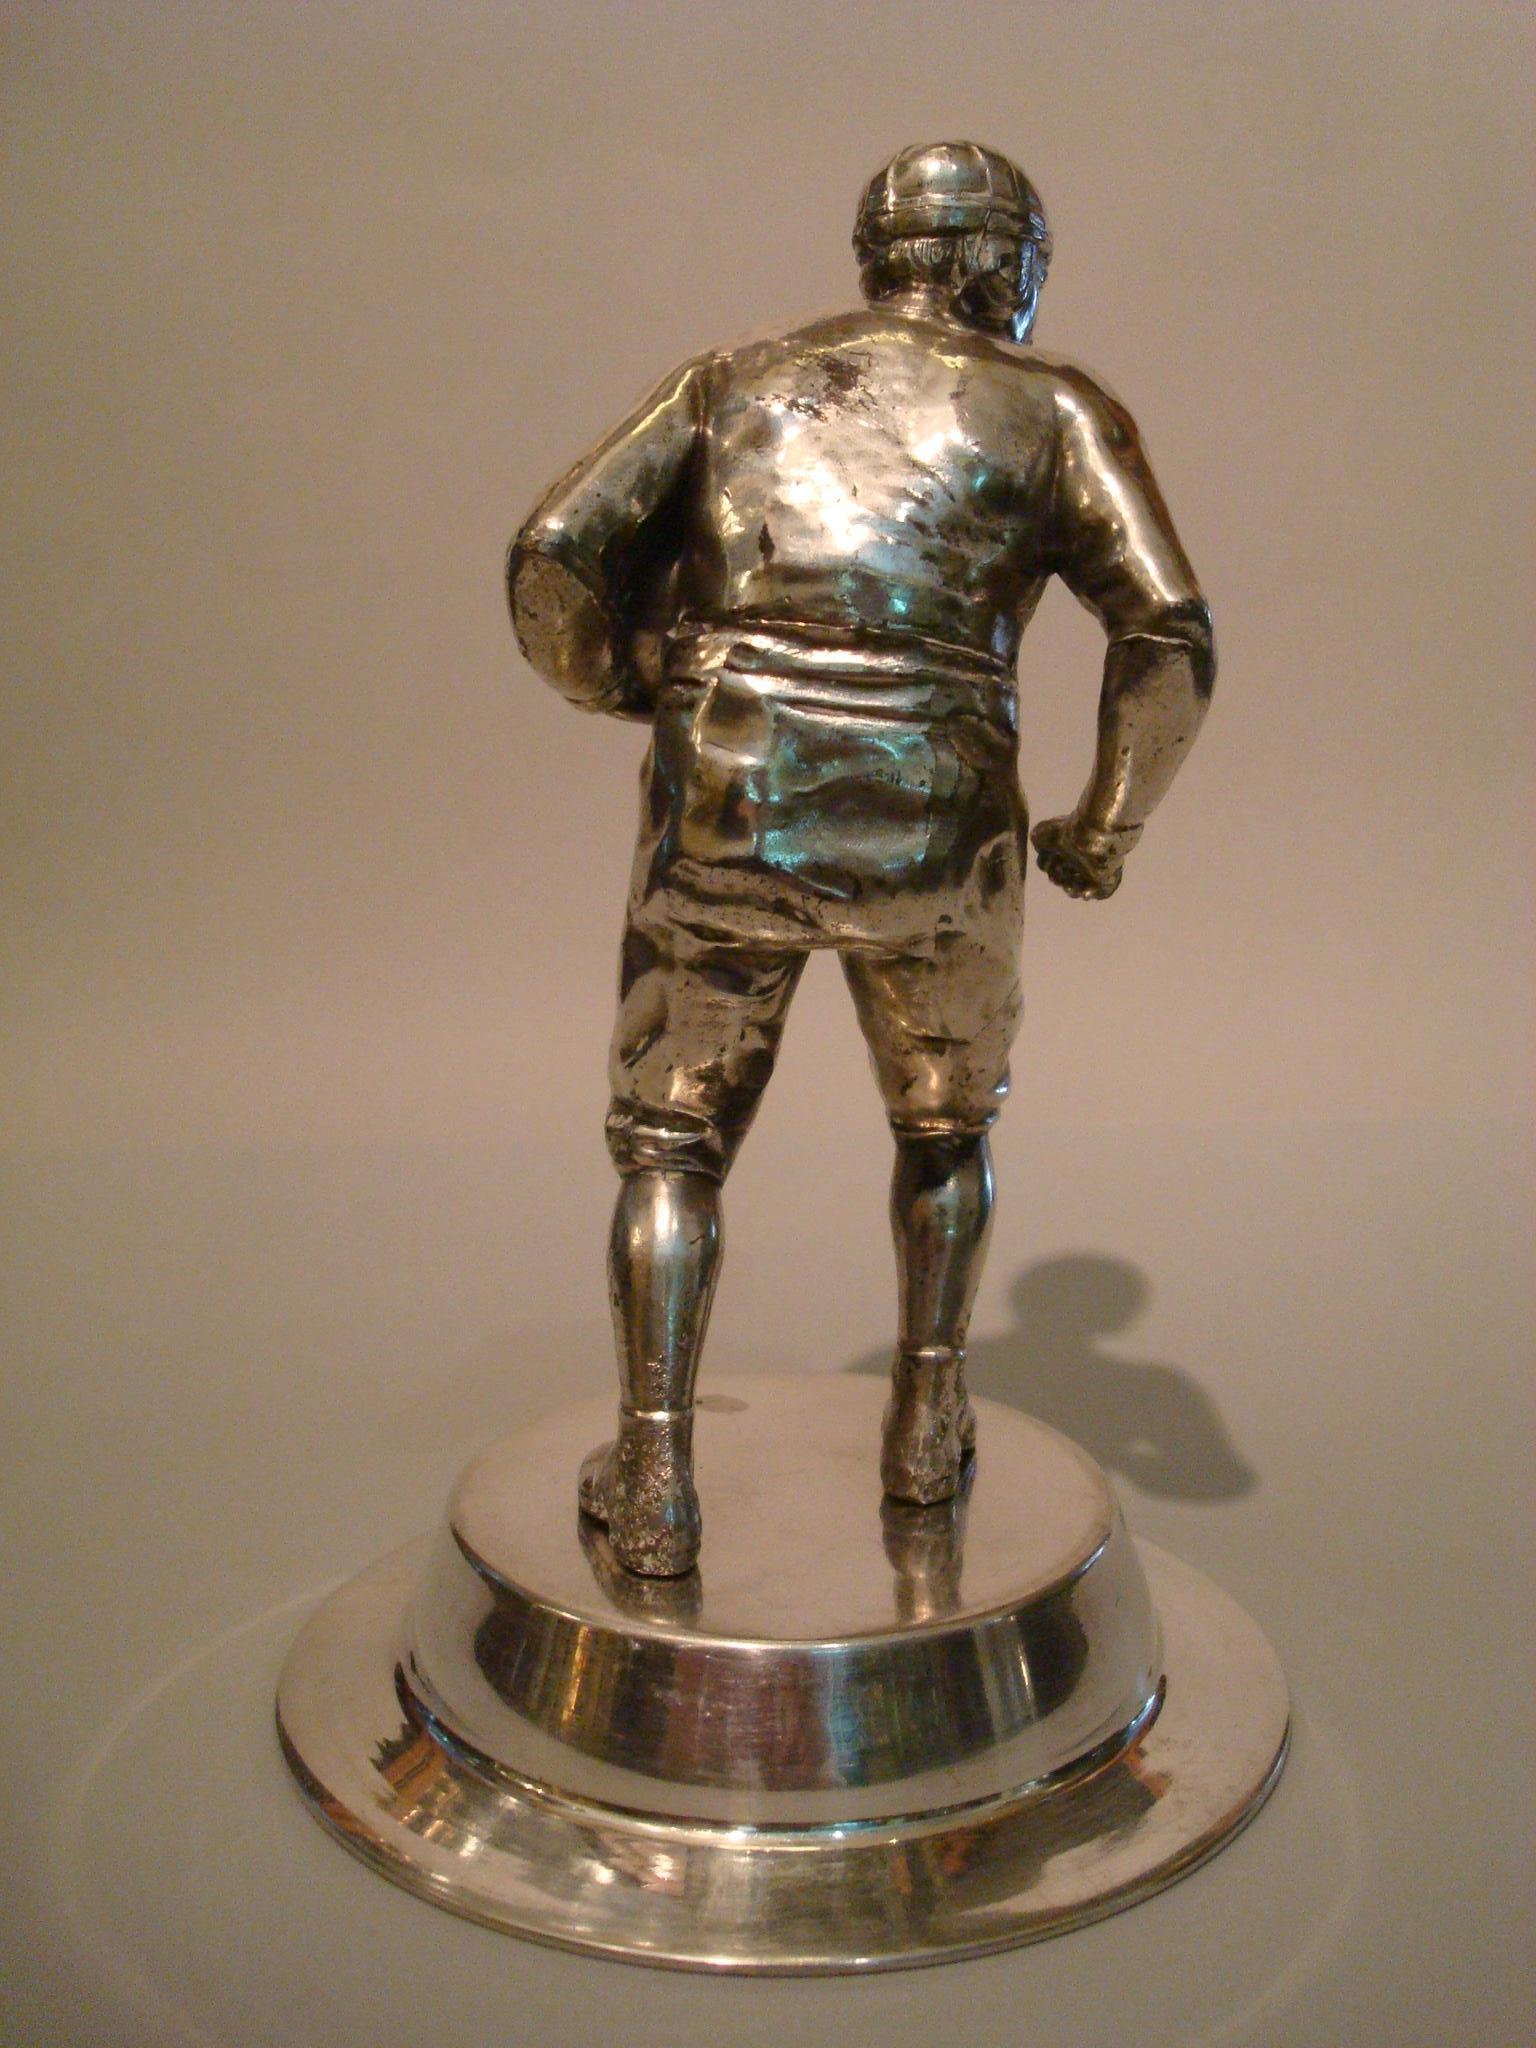 American Football Player Sculpture / Trophy. Desk piece. Silvered Metal, 1930´s.
Under one of the player´s foot, it is marked Wright Soc. Anonima and Silvered plated.